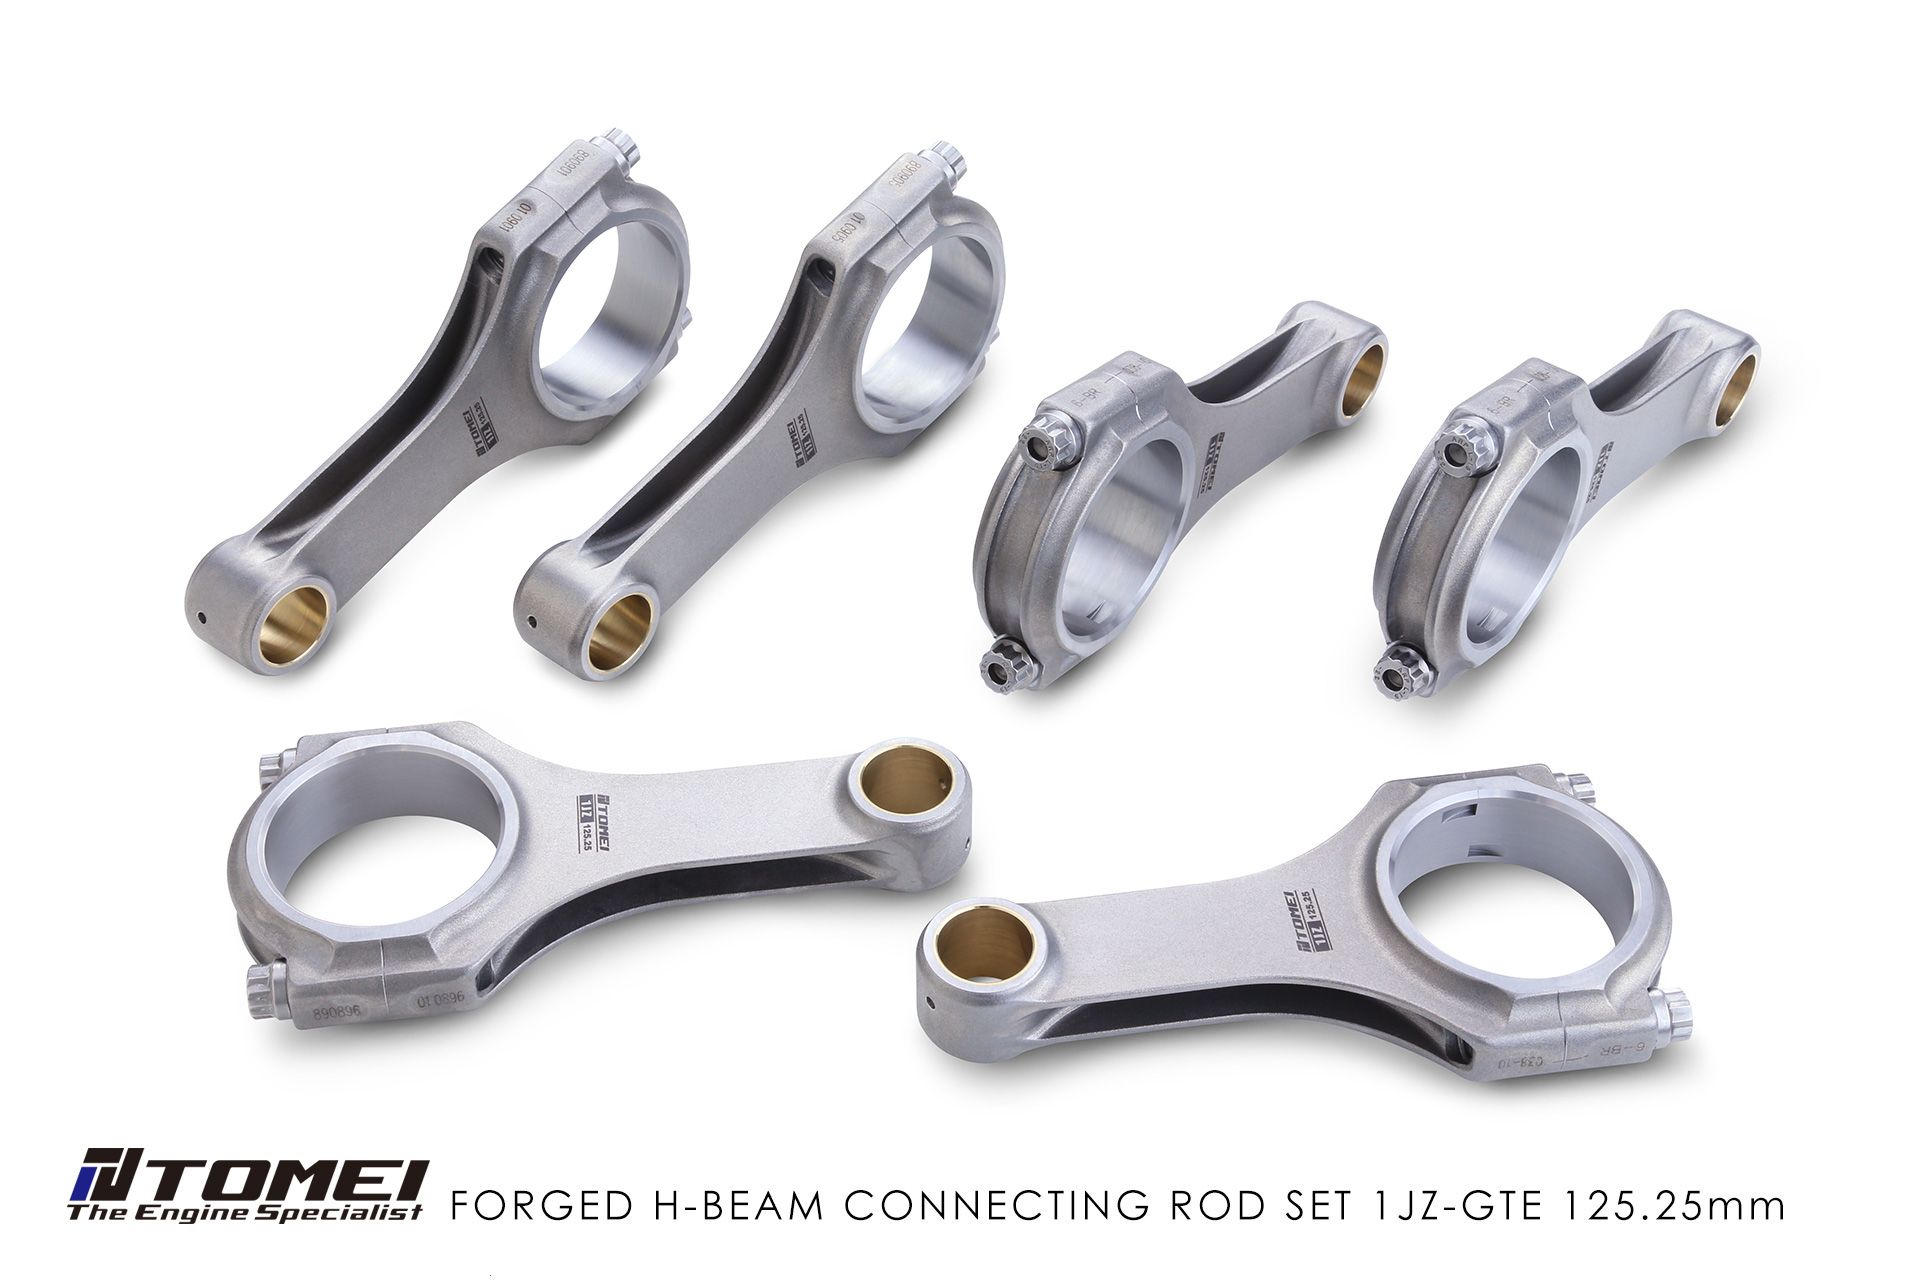 Tomei Forged H-Beam Connecting Rod Set 1JZ-GTE 125.25mm